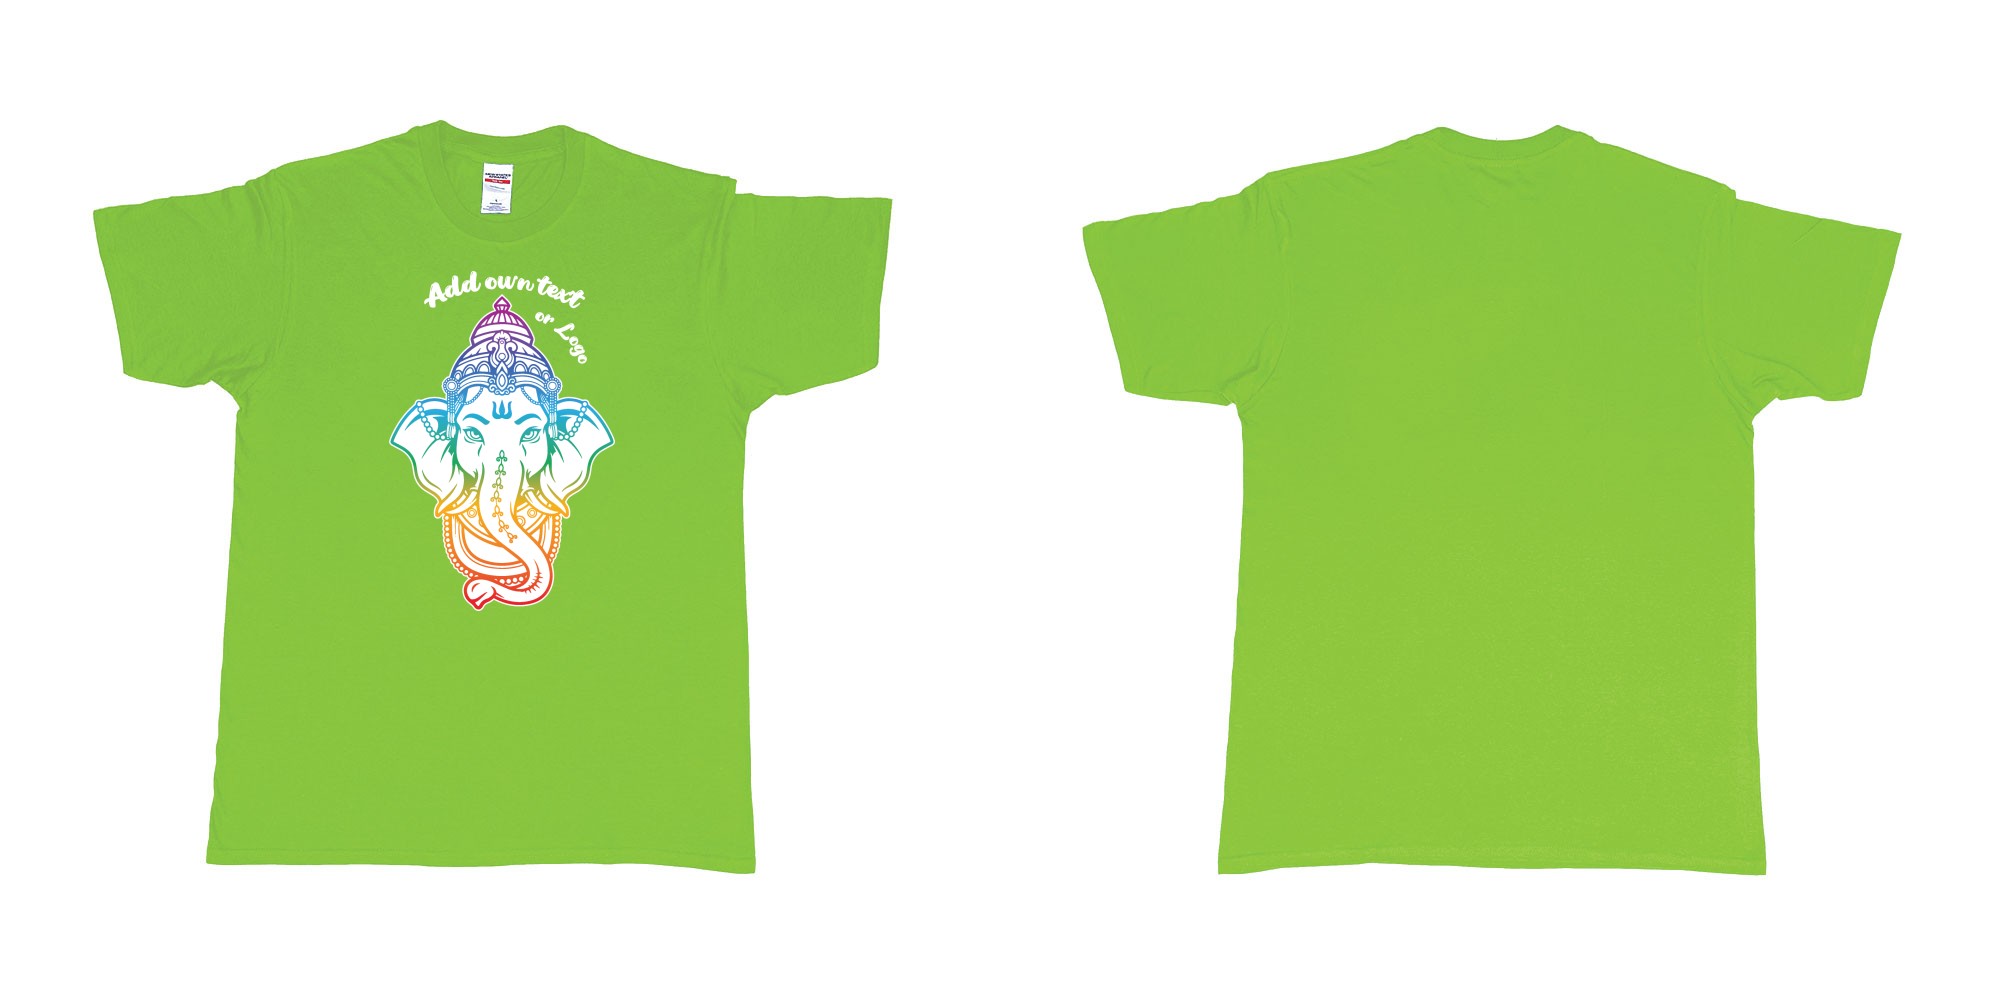 Custom tshirt design ganesha rainbow custom printing in fabric color lime choice your own text made in Bali by The Pirate Way